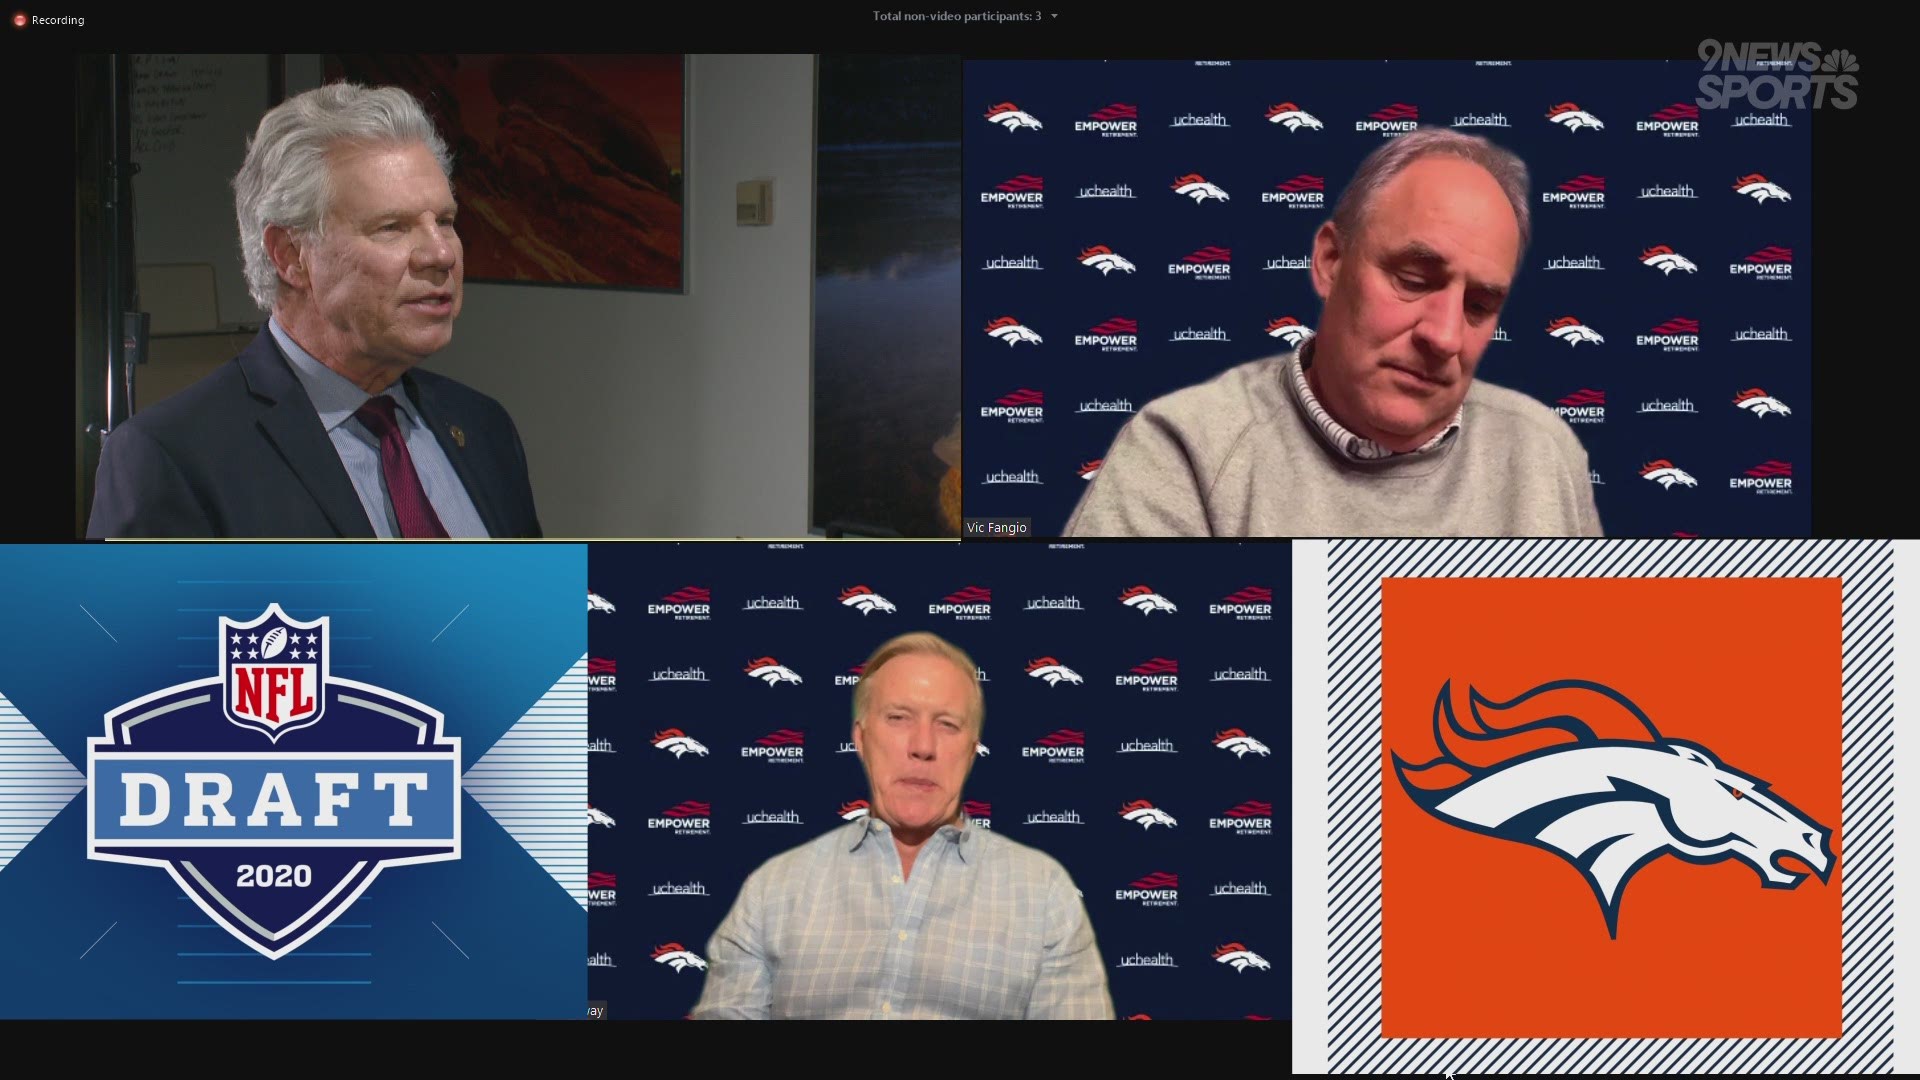 Tired of ranking near the bottom of NFL rankings in points scored, Elway explains loading up on offense this offseason.